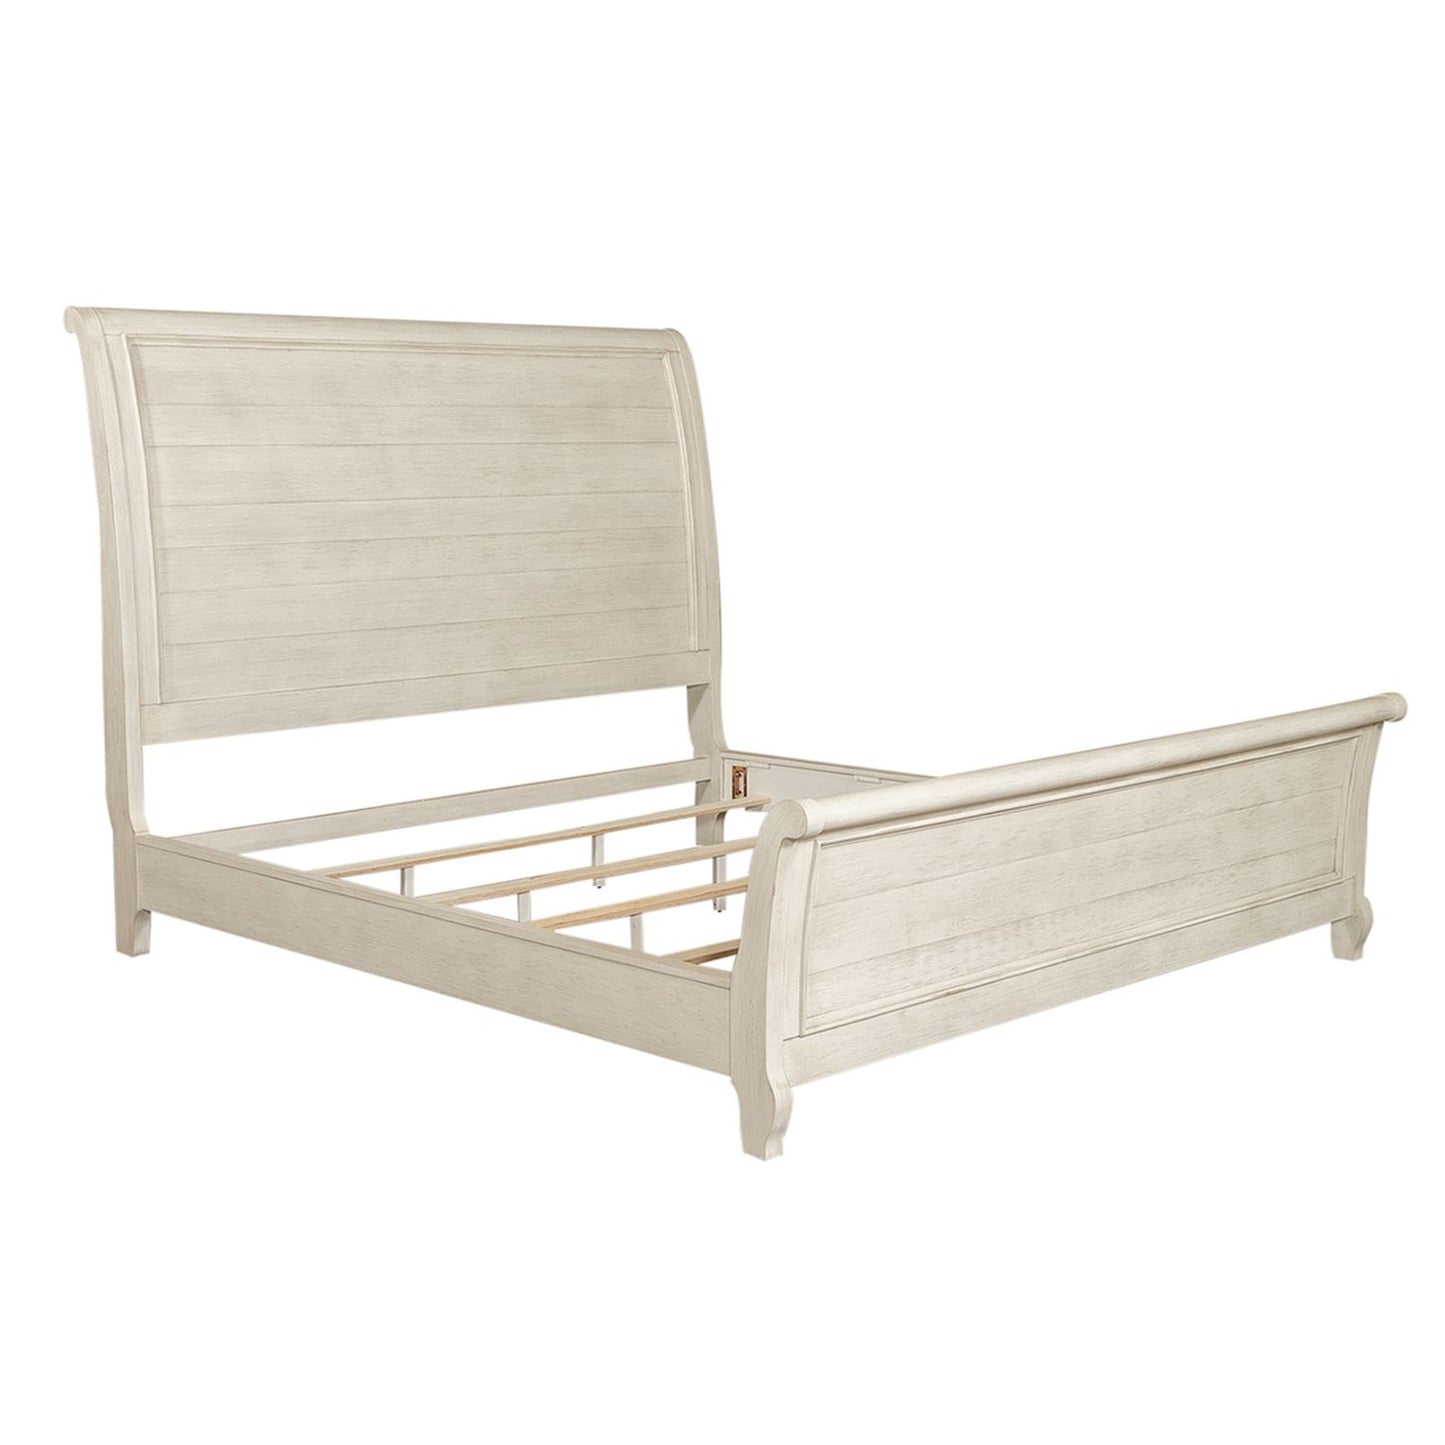 Farmhouse Reimagined - Queen Sleigh Bed